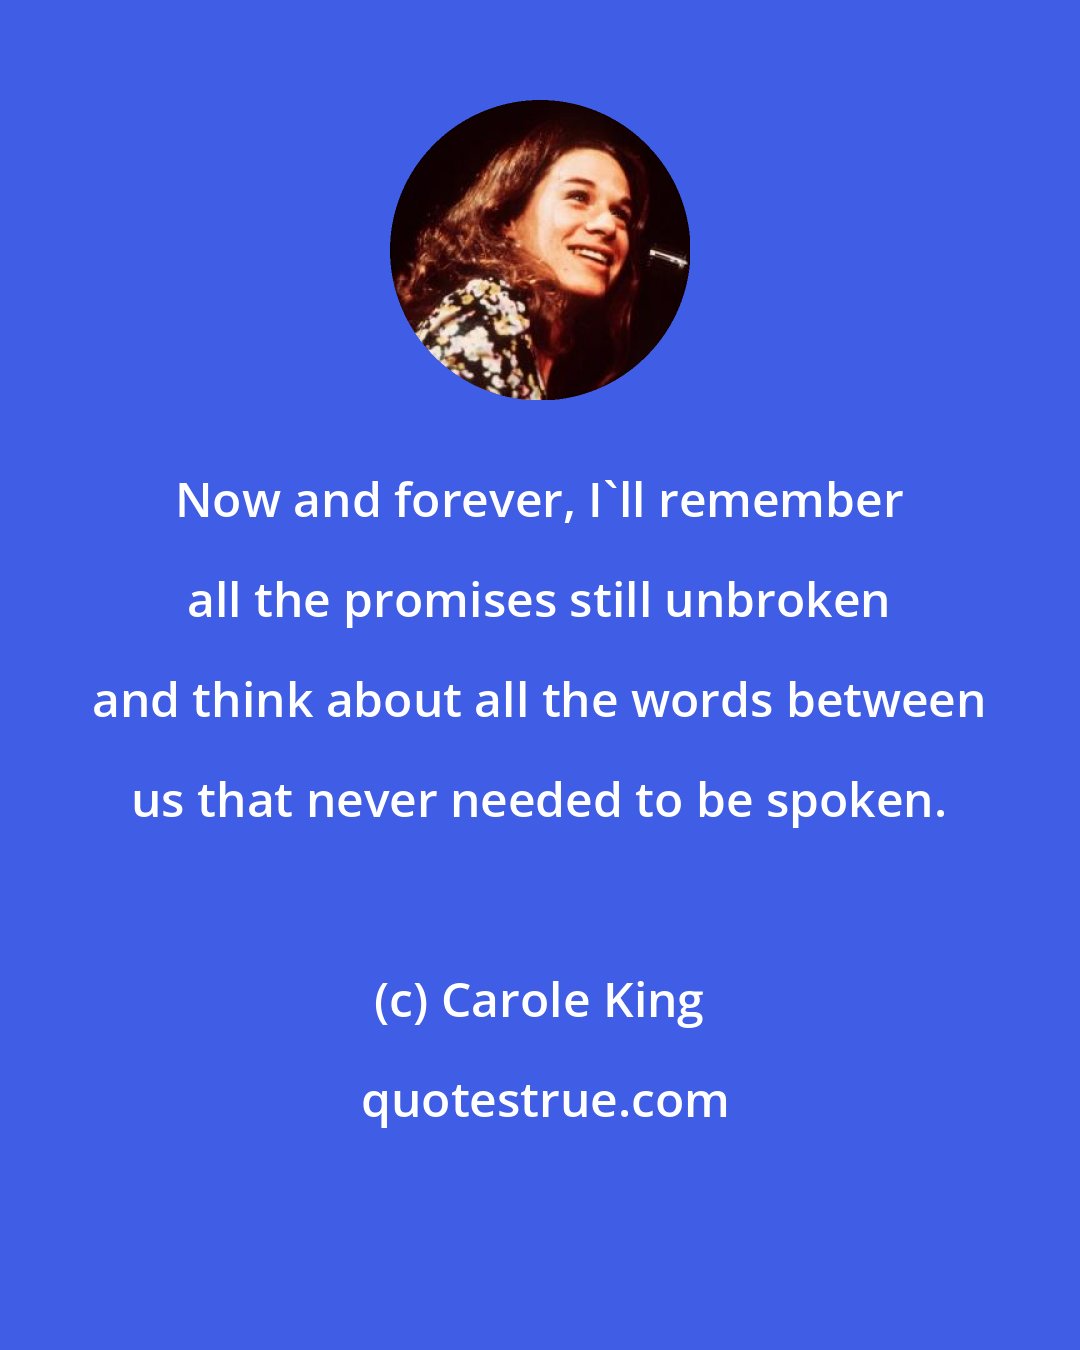 Carole King: Now and forever, I'll remember all the promises still unbroken and think about all the words between us that never needed to be spoken.